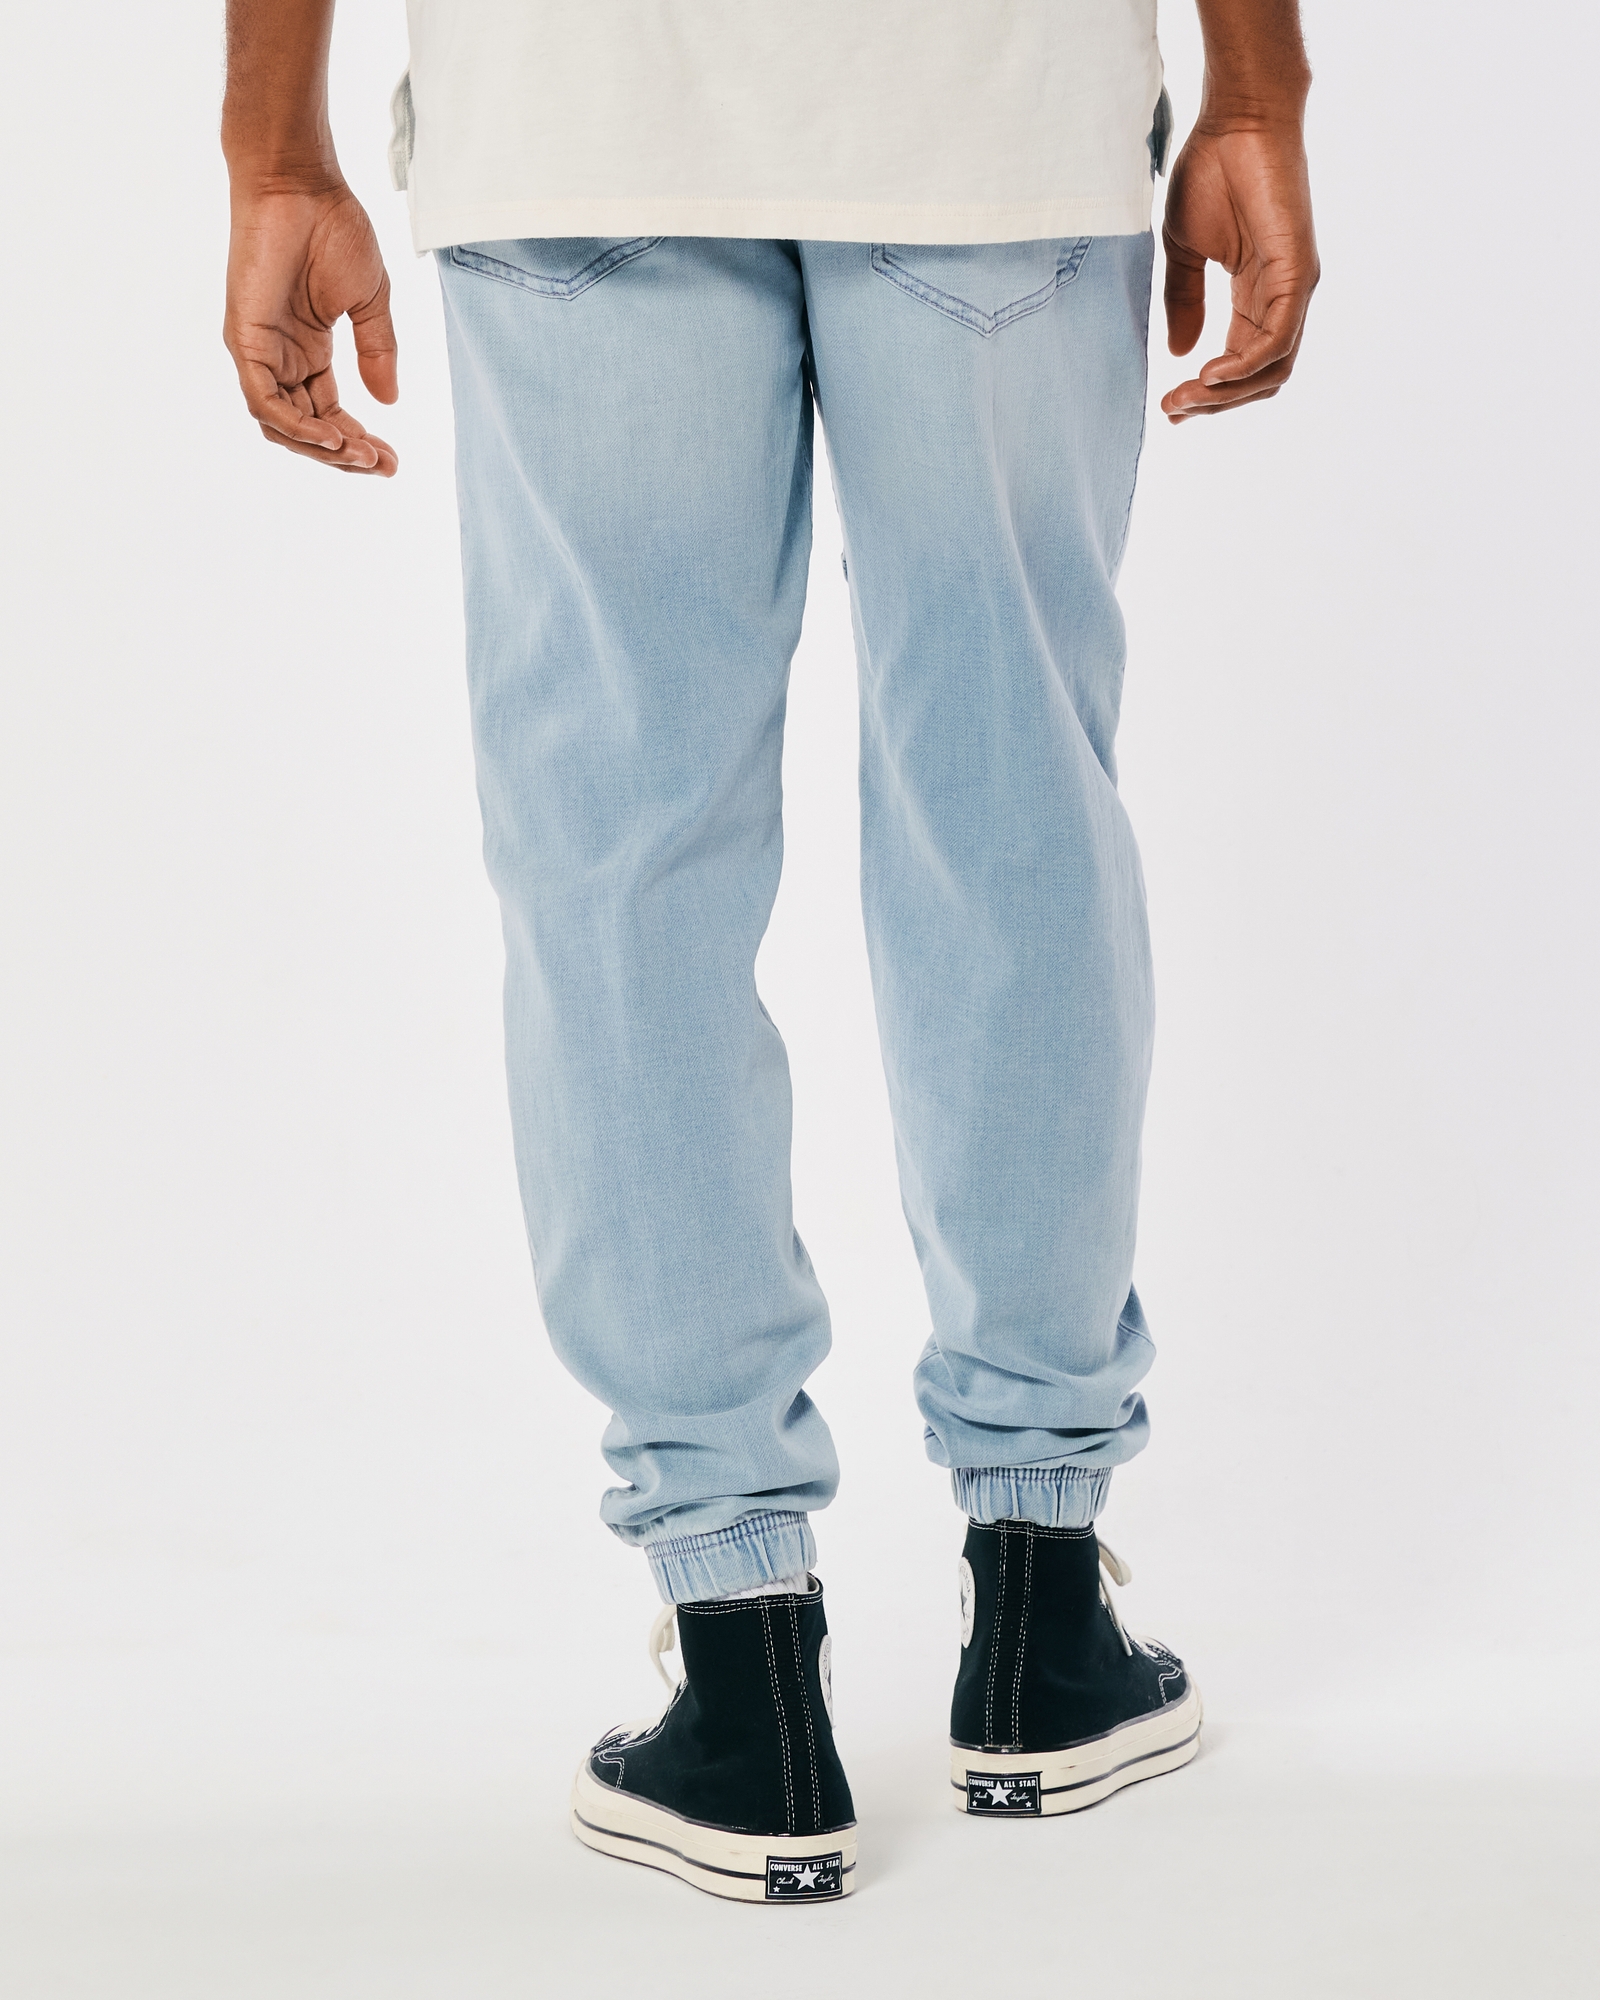 Men's Light Wash Just Like Knit Relaxed Denim Joggers